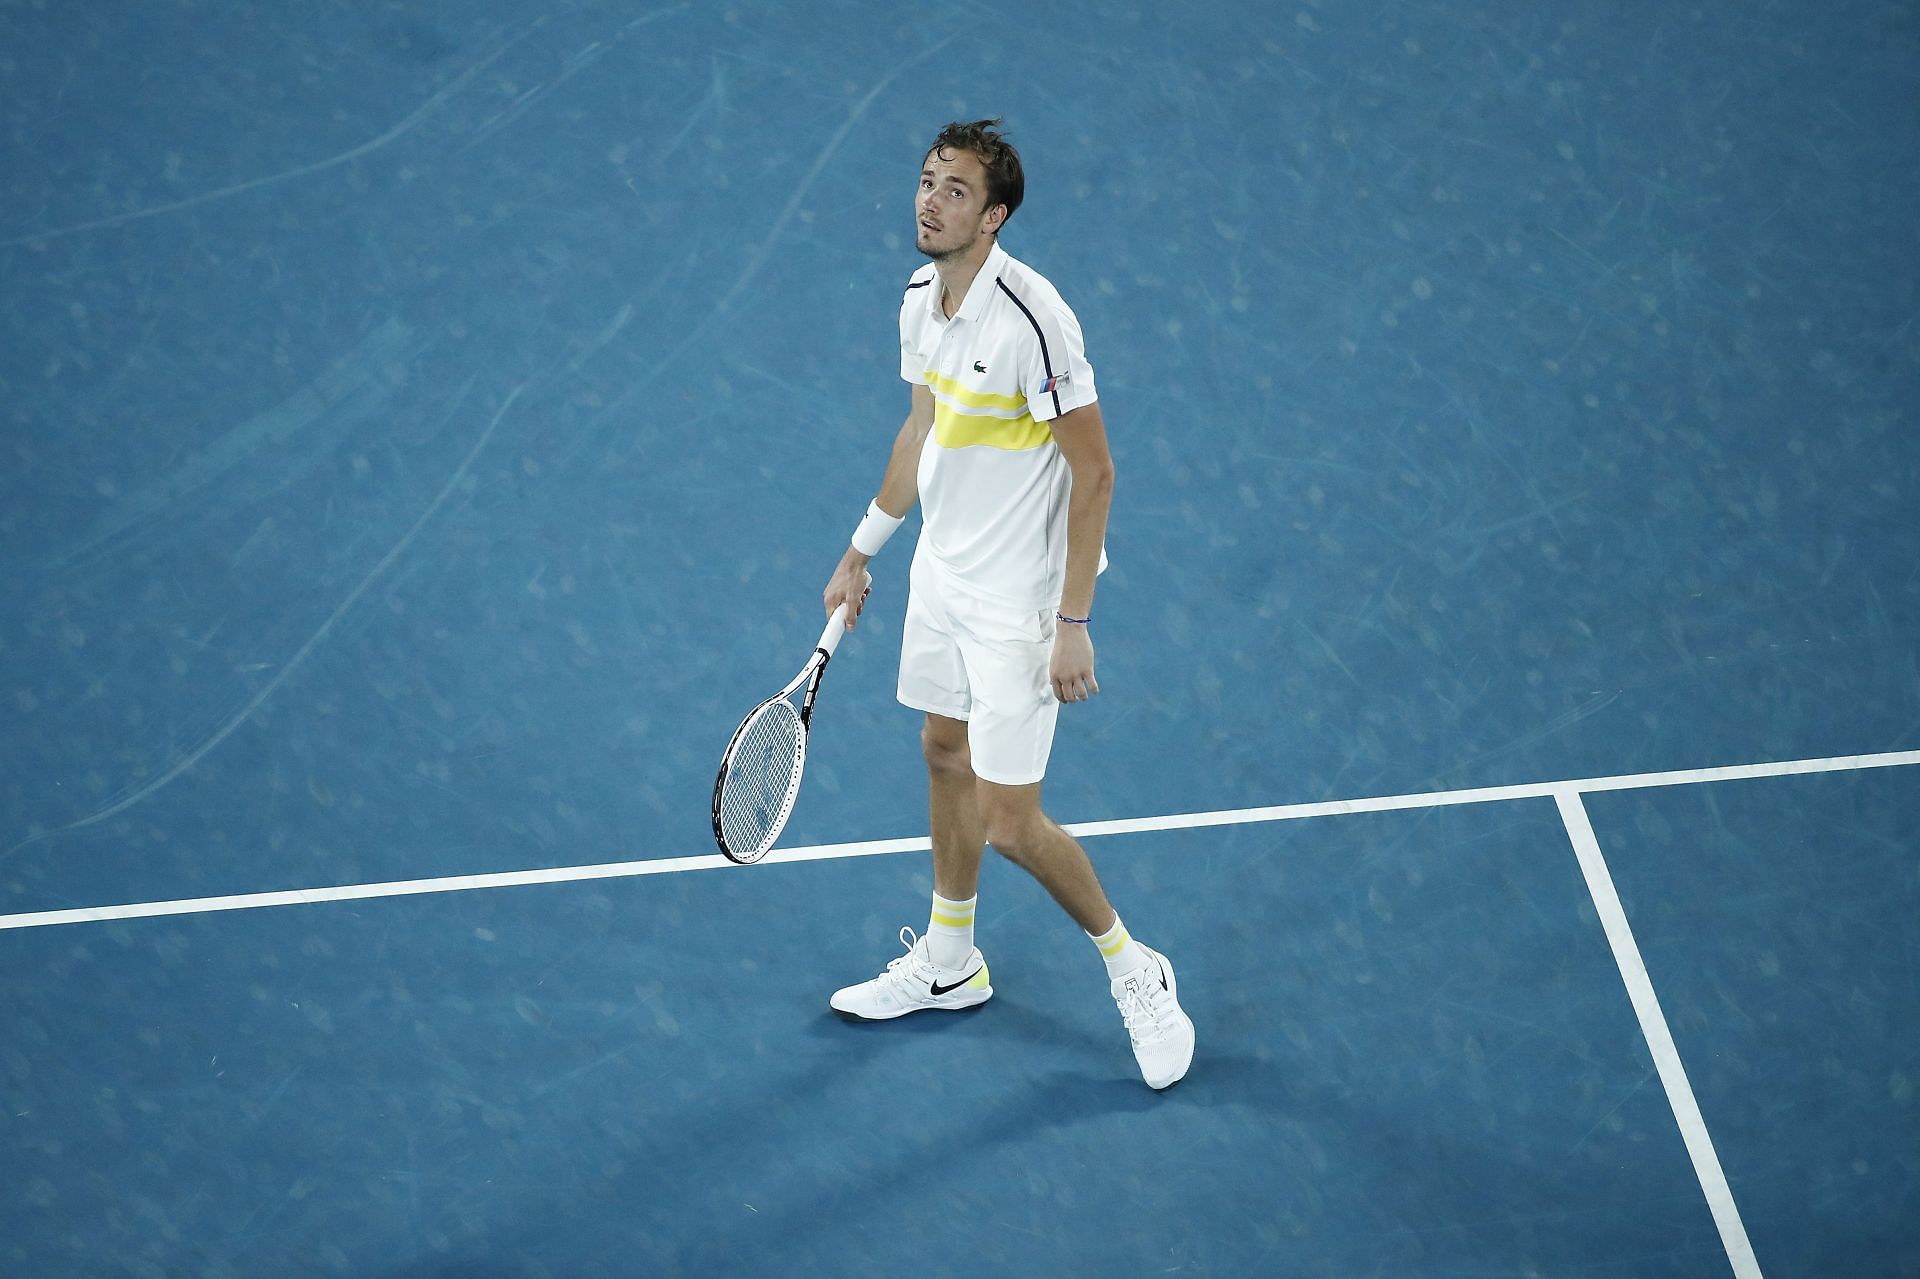 Medvedev was the runner up at the 2021 Australian Open.